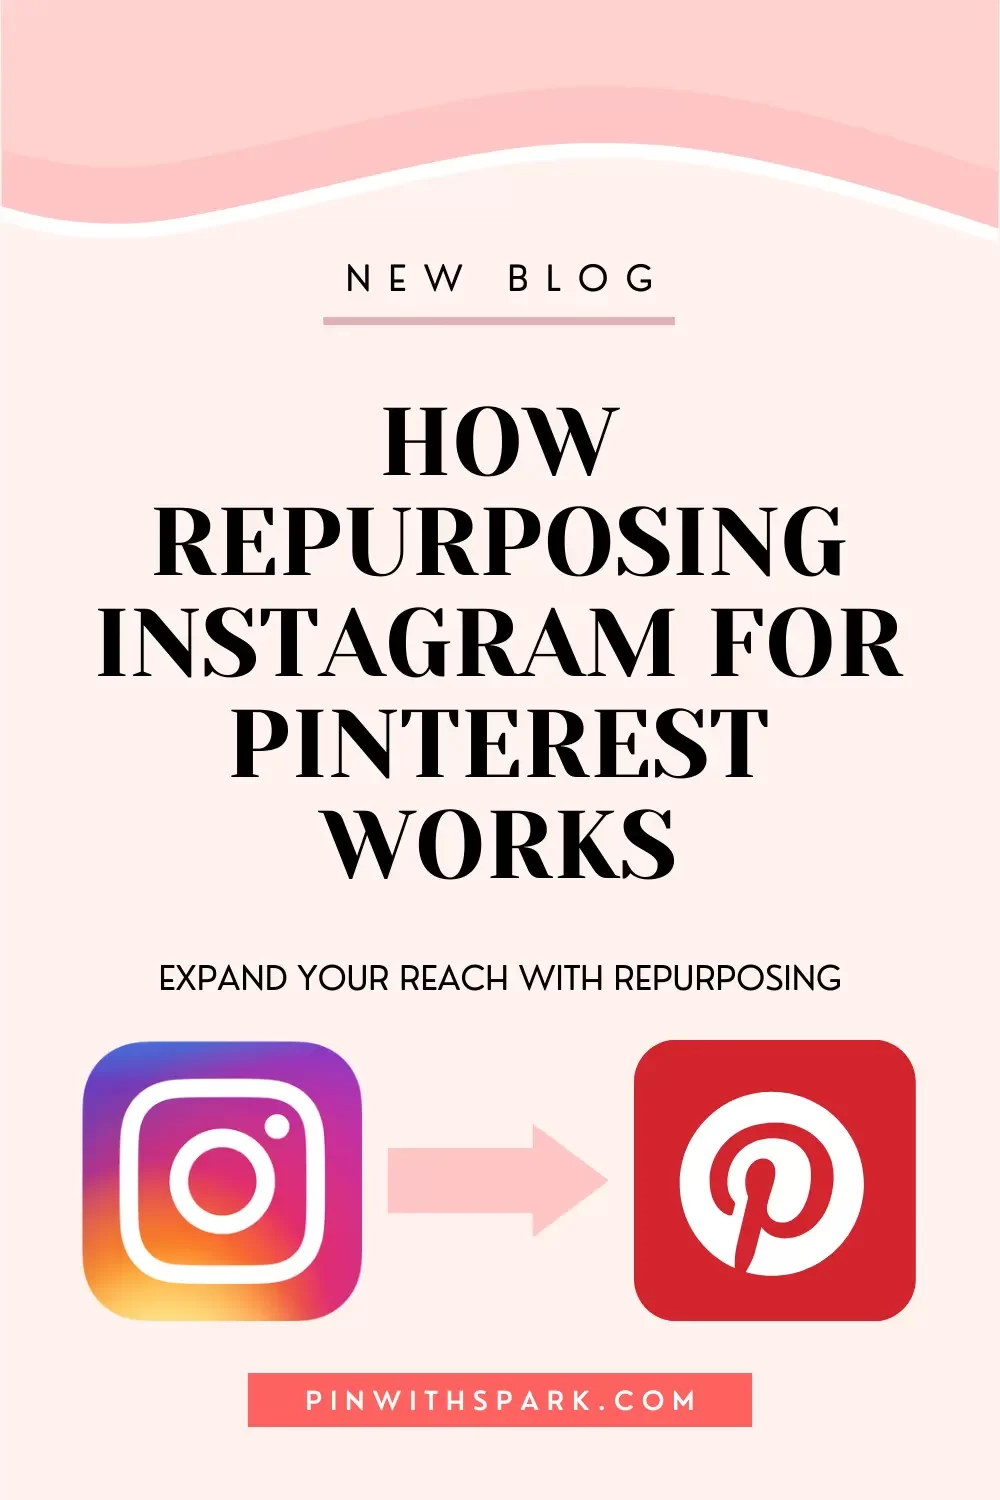 how repurposing instagram for pinterest works image of instagram icon and Pinterest icon pinwithspark.com